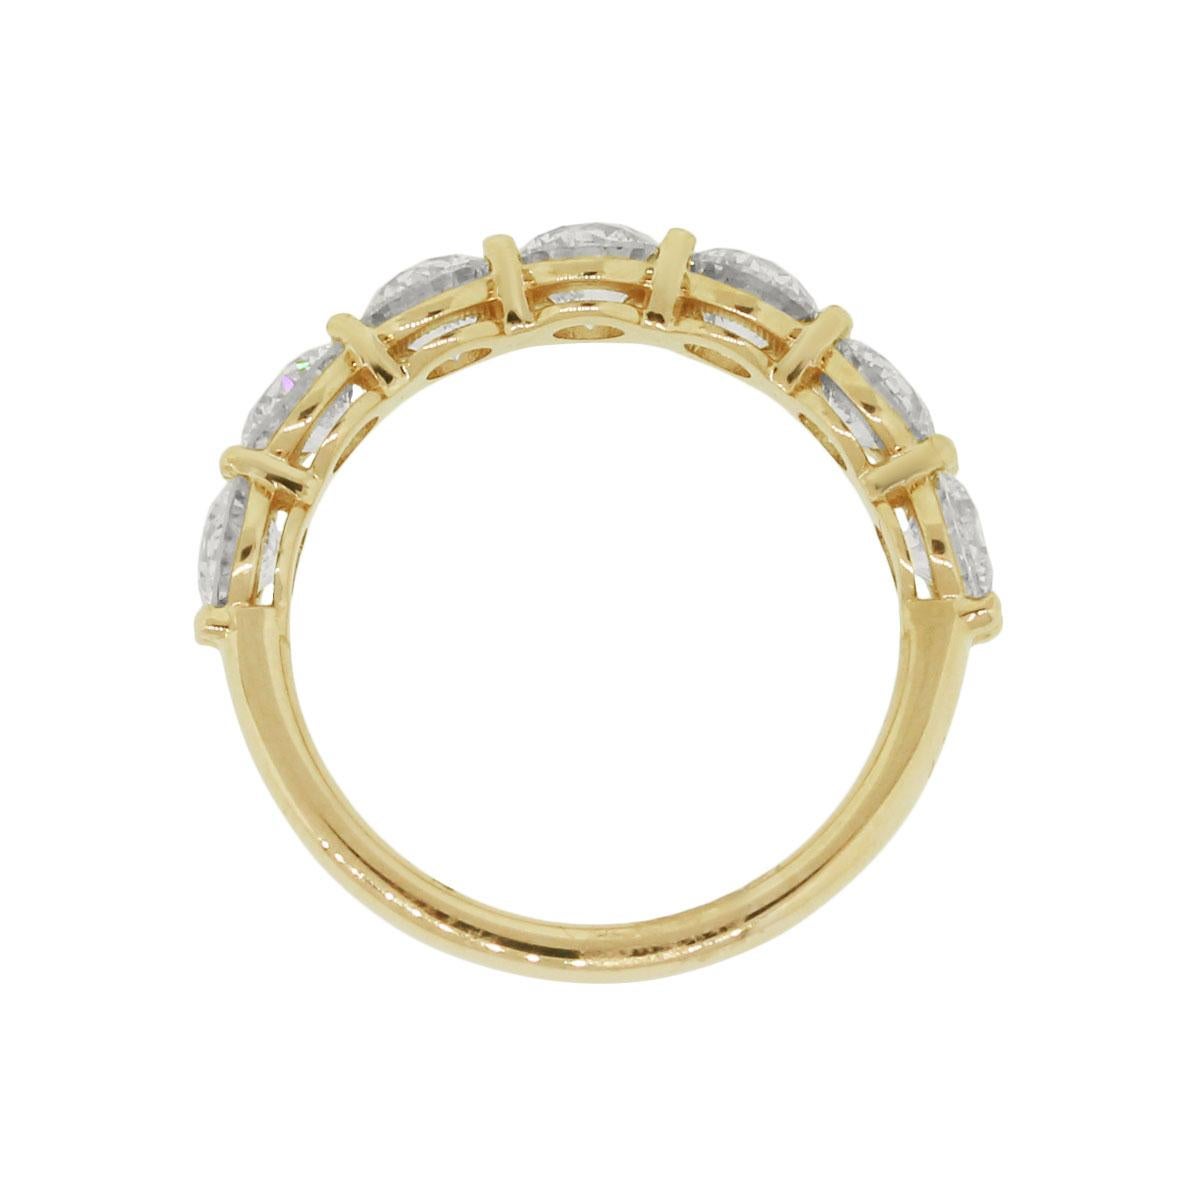 Material: 14k yellow gold
Diamond Details: Approximately 2.19ctw of round brilliant diamonds. Diamonds are G in color and VS in clarity.
Measurements: 0.84″ x 0.17″ 0.89″
Ring Size: 6.50
Item Weight: 3.3g (2.1dwt)
Additional Details: This item comes